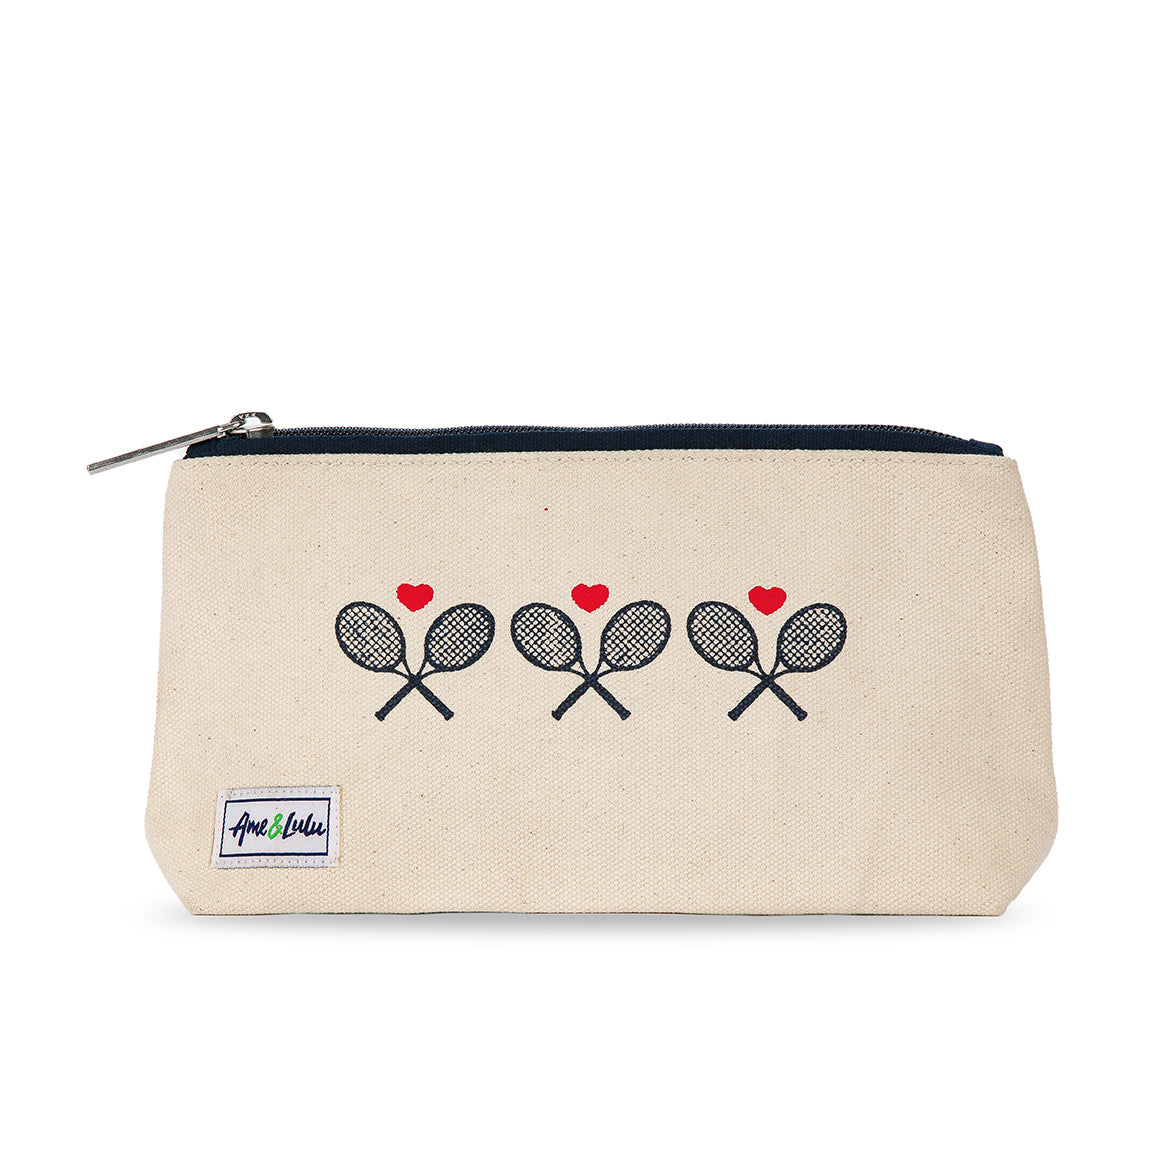 Front view of small canvas makeup pouch with navy zipper. Front has three crossed racquets in navy printed on